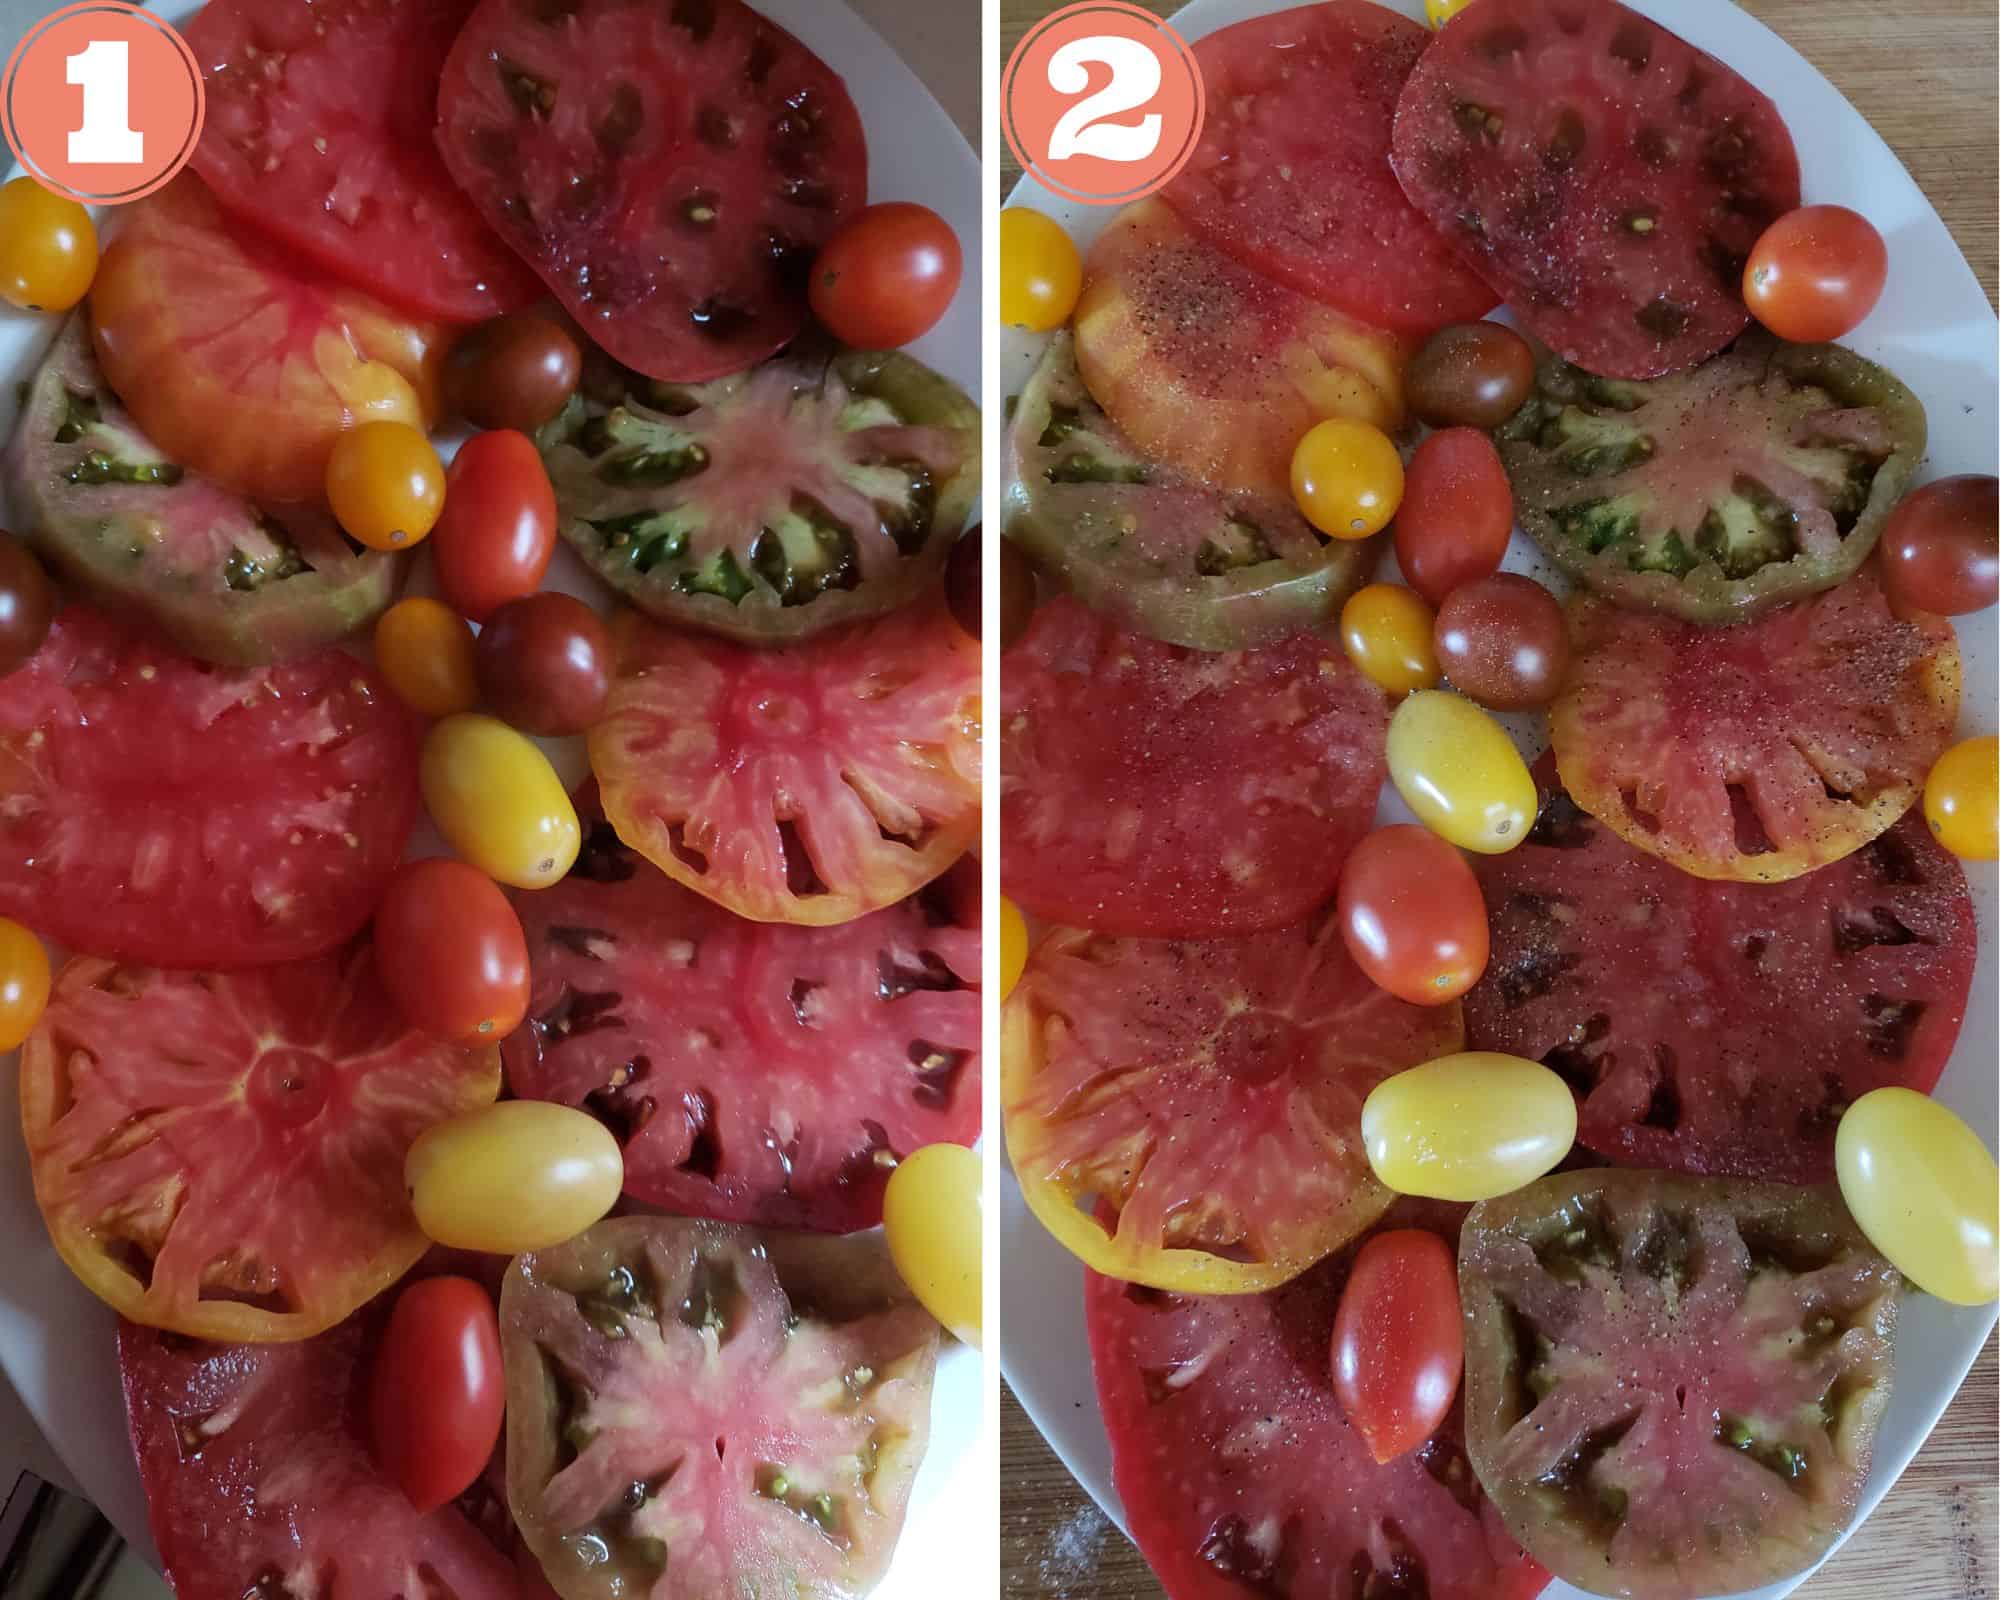 photos that show placing the tomatoes on a plate, and adding salt and pepper to the tomatoes.